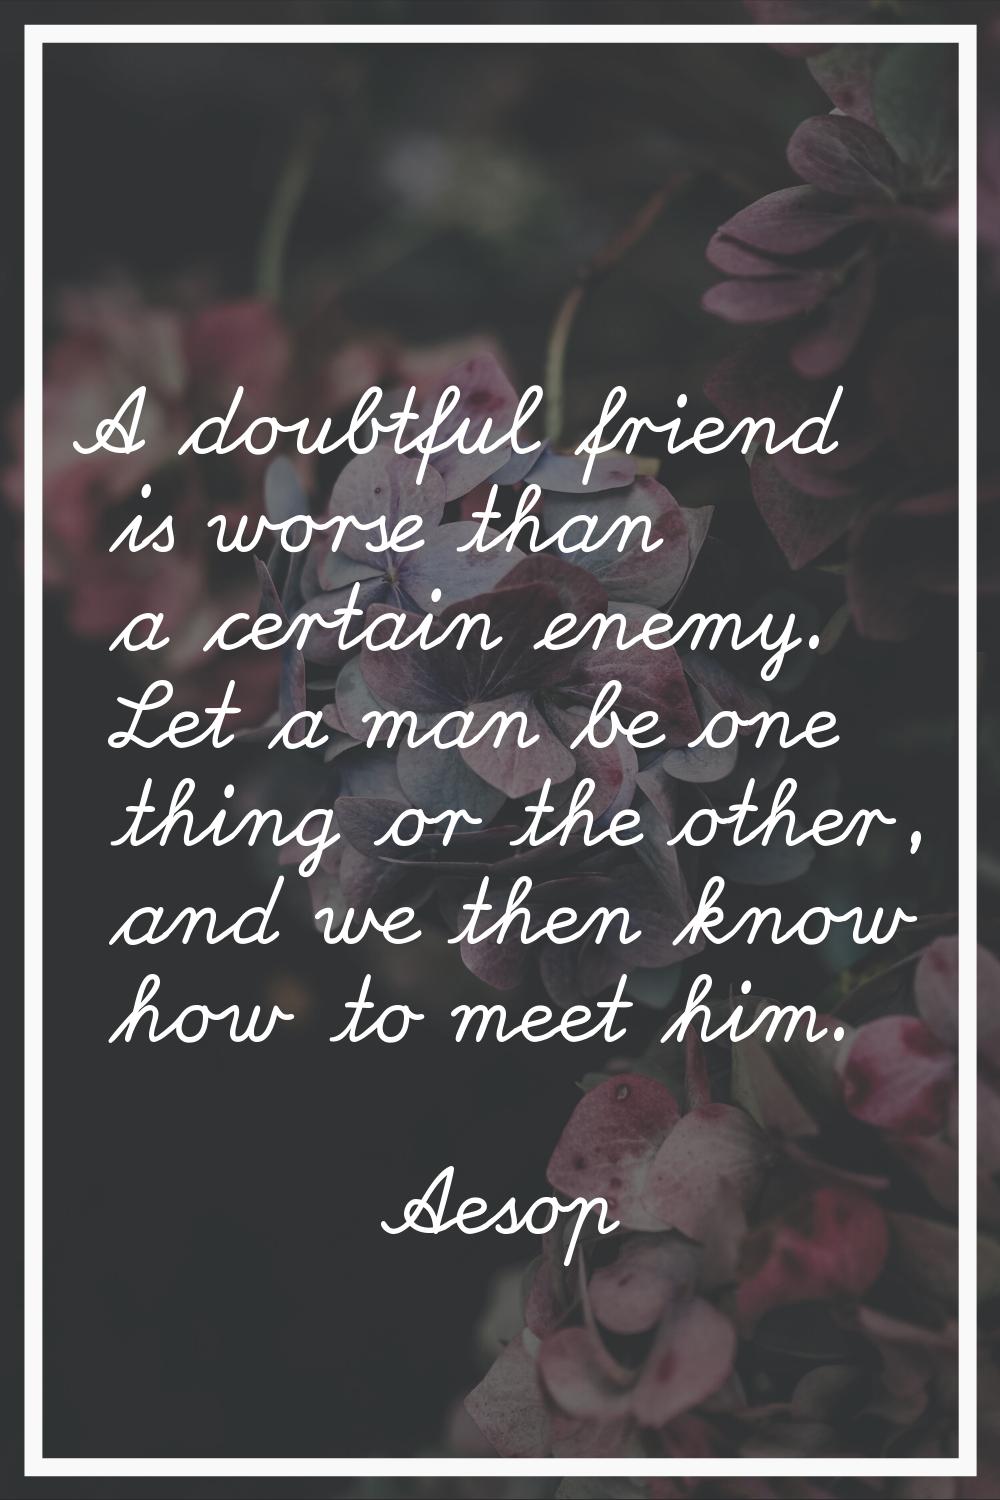 A doubtful friend is worse than a certain enemy. Let a man be one thing or the other, and we then k